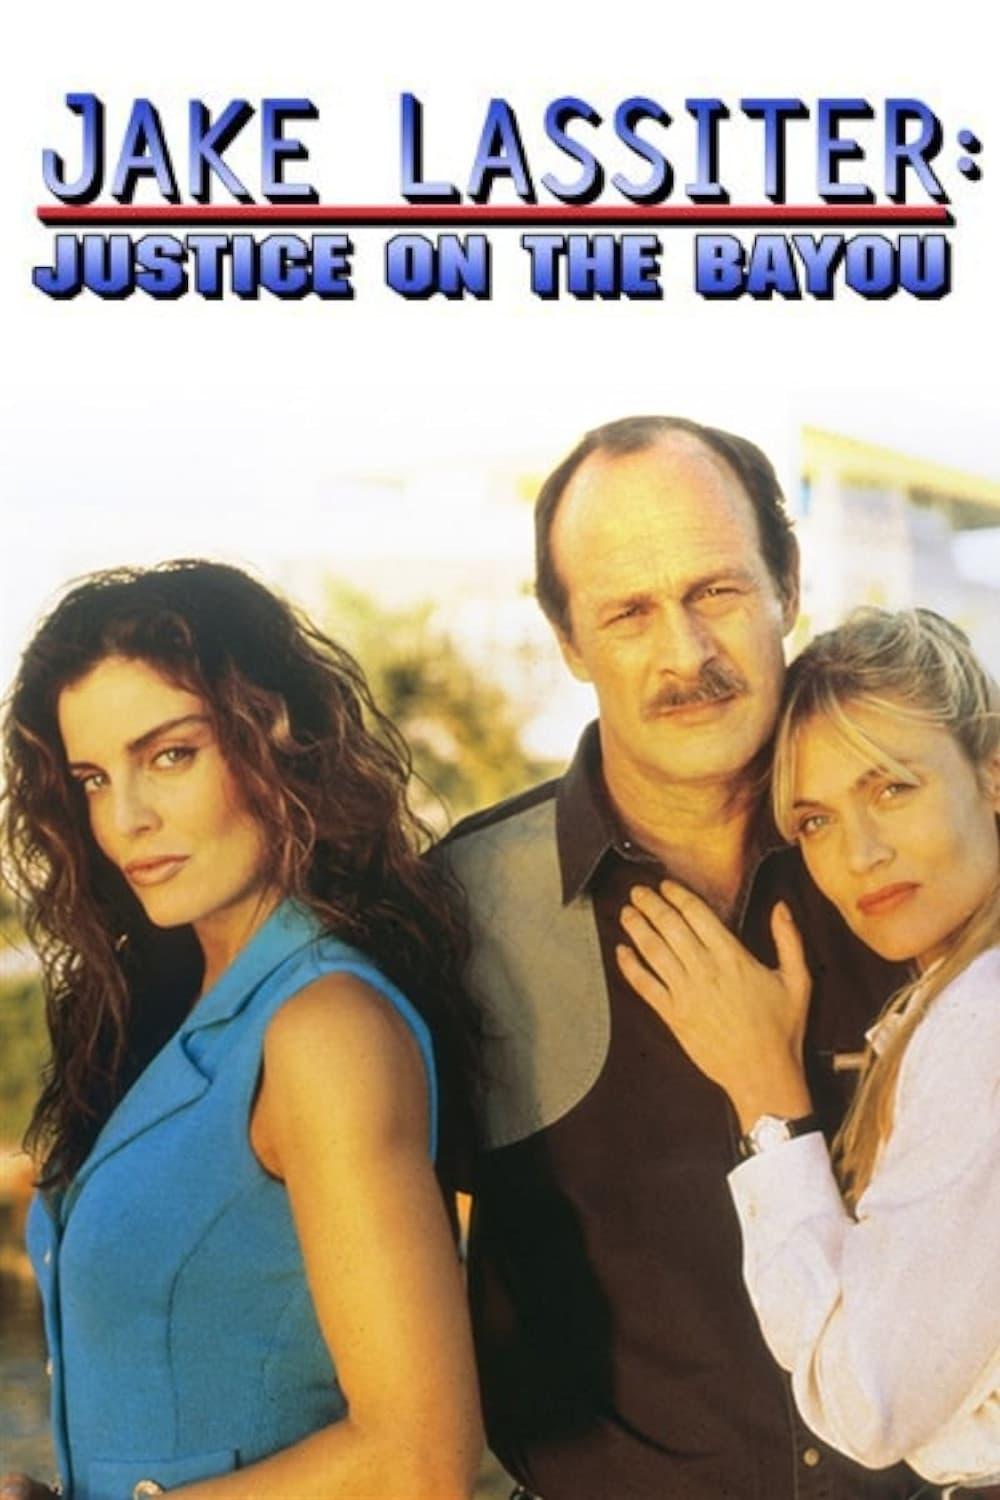 Jake Lassiter: Justice on the Bayou poster